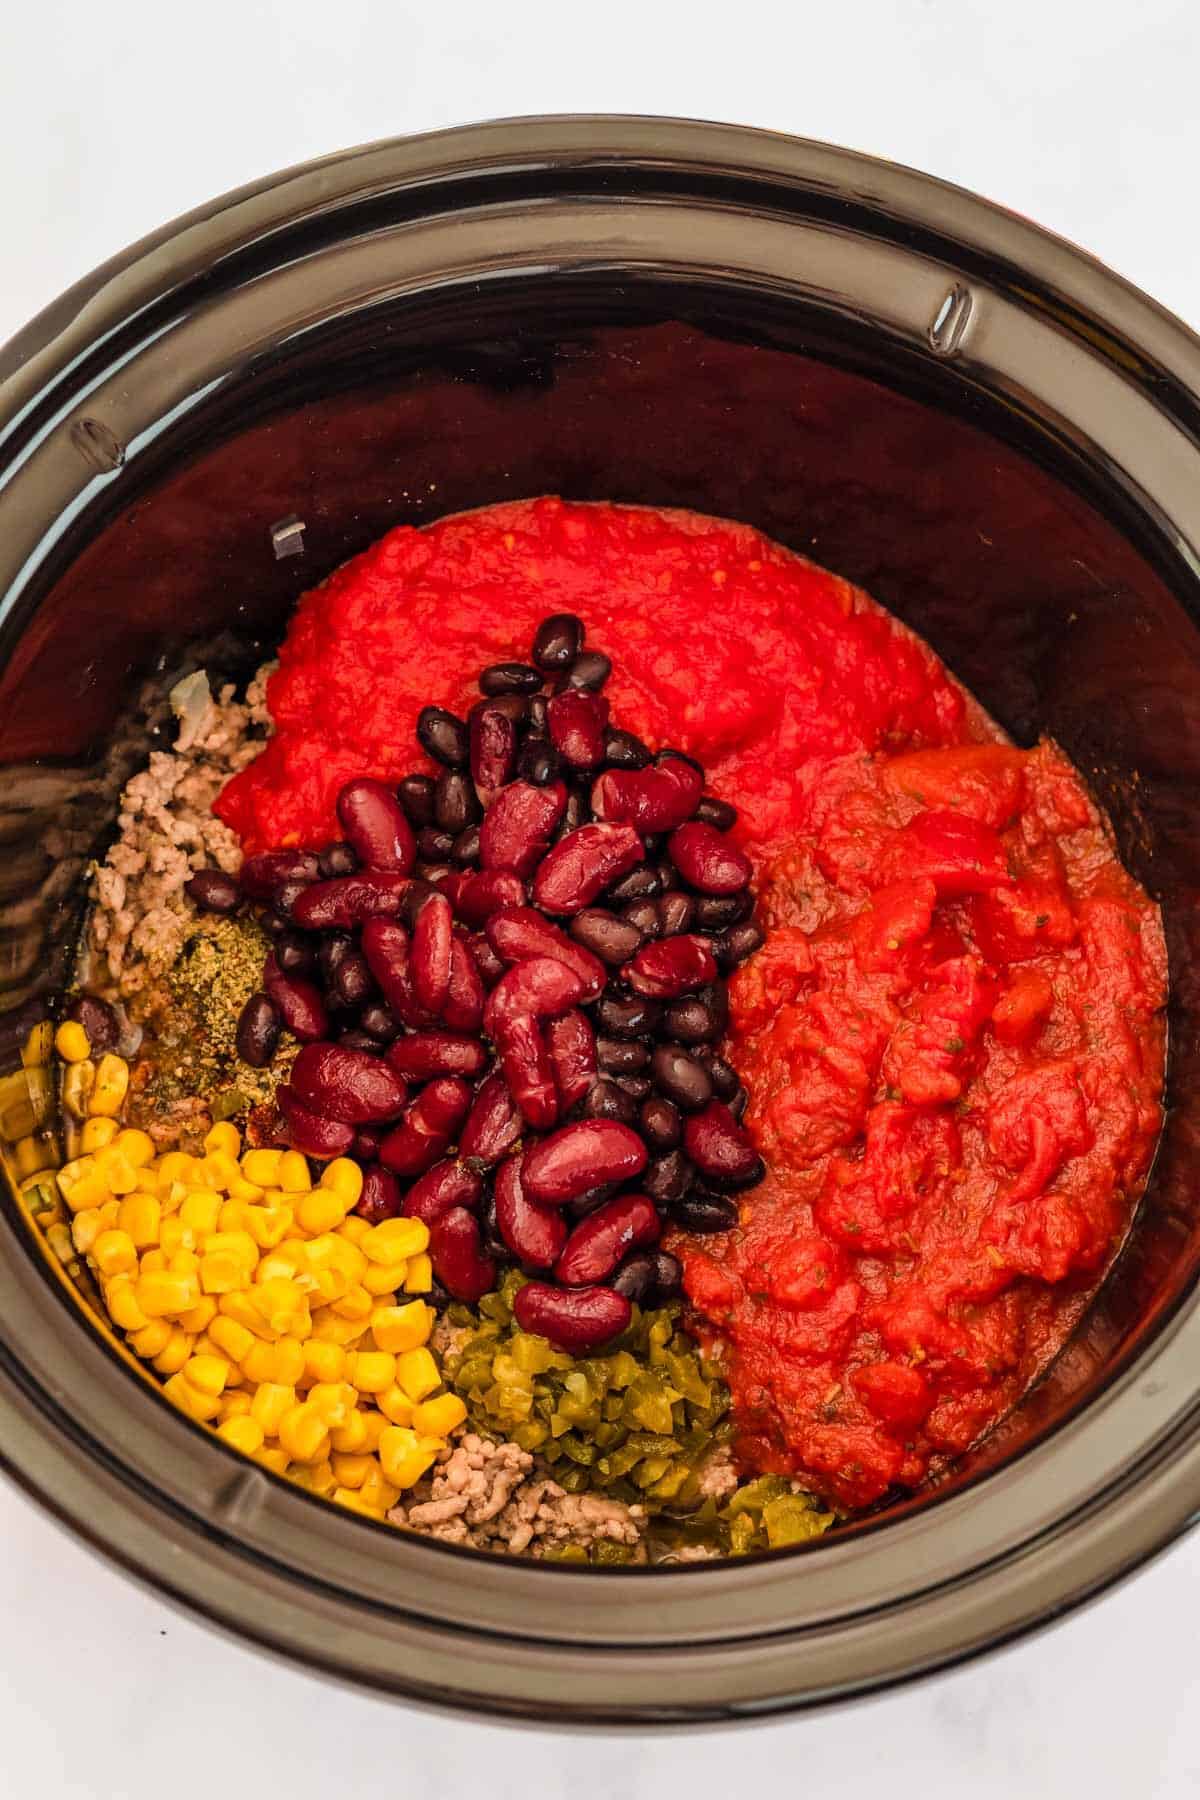 Other ingredients such as tomatoes, beans and ranch dressing mix added to the crockpot. 